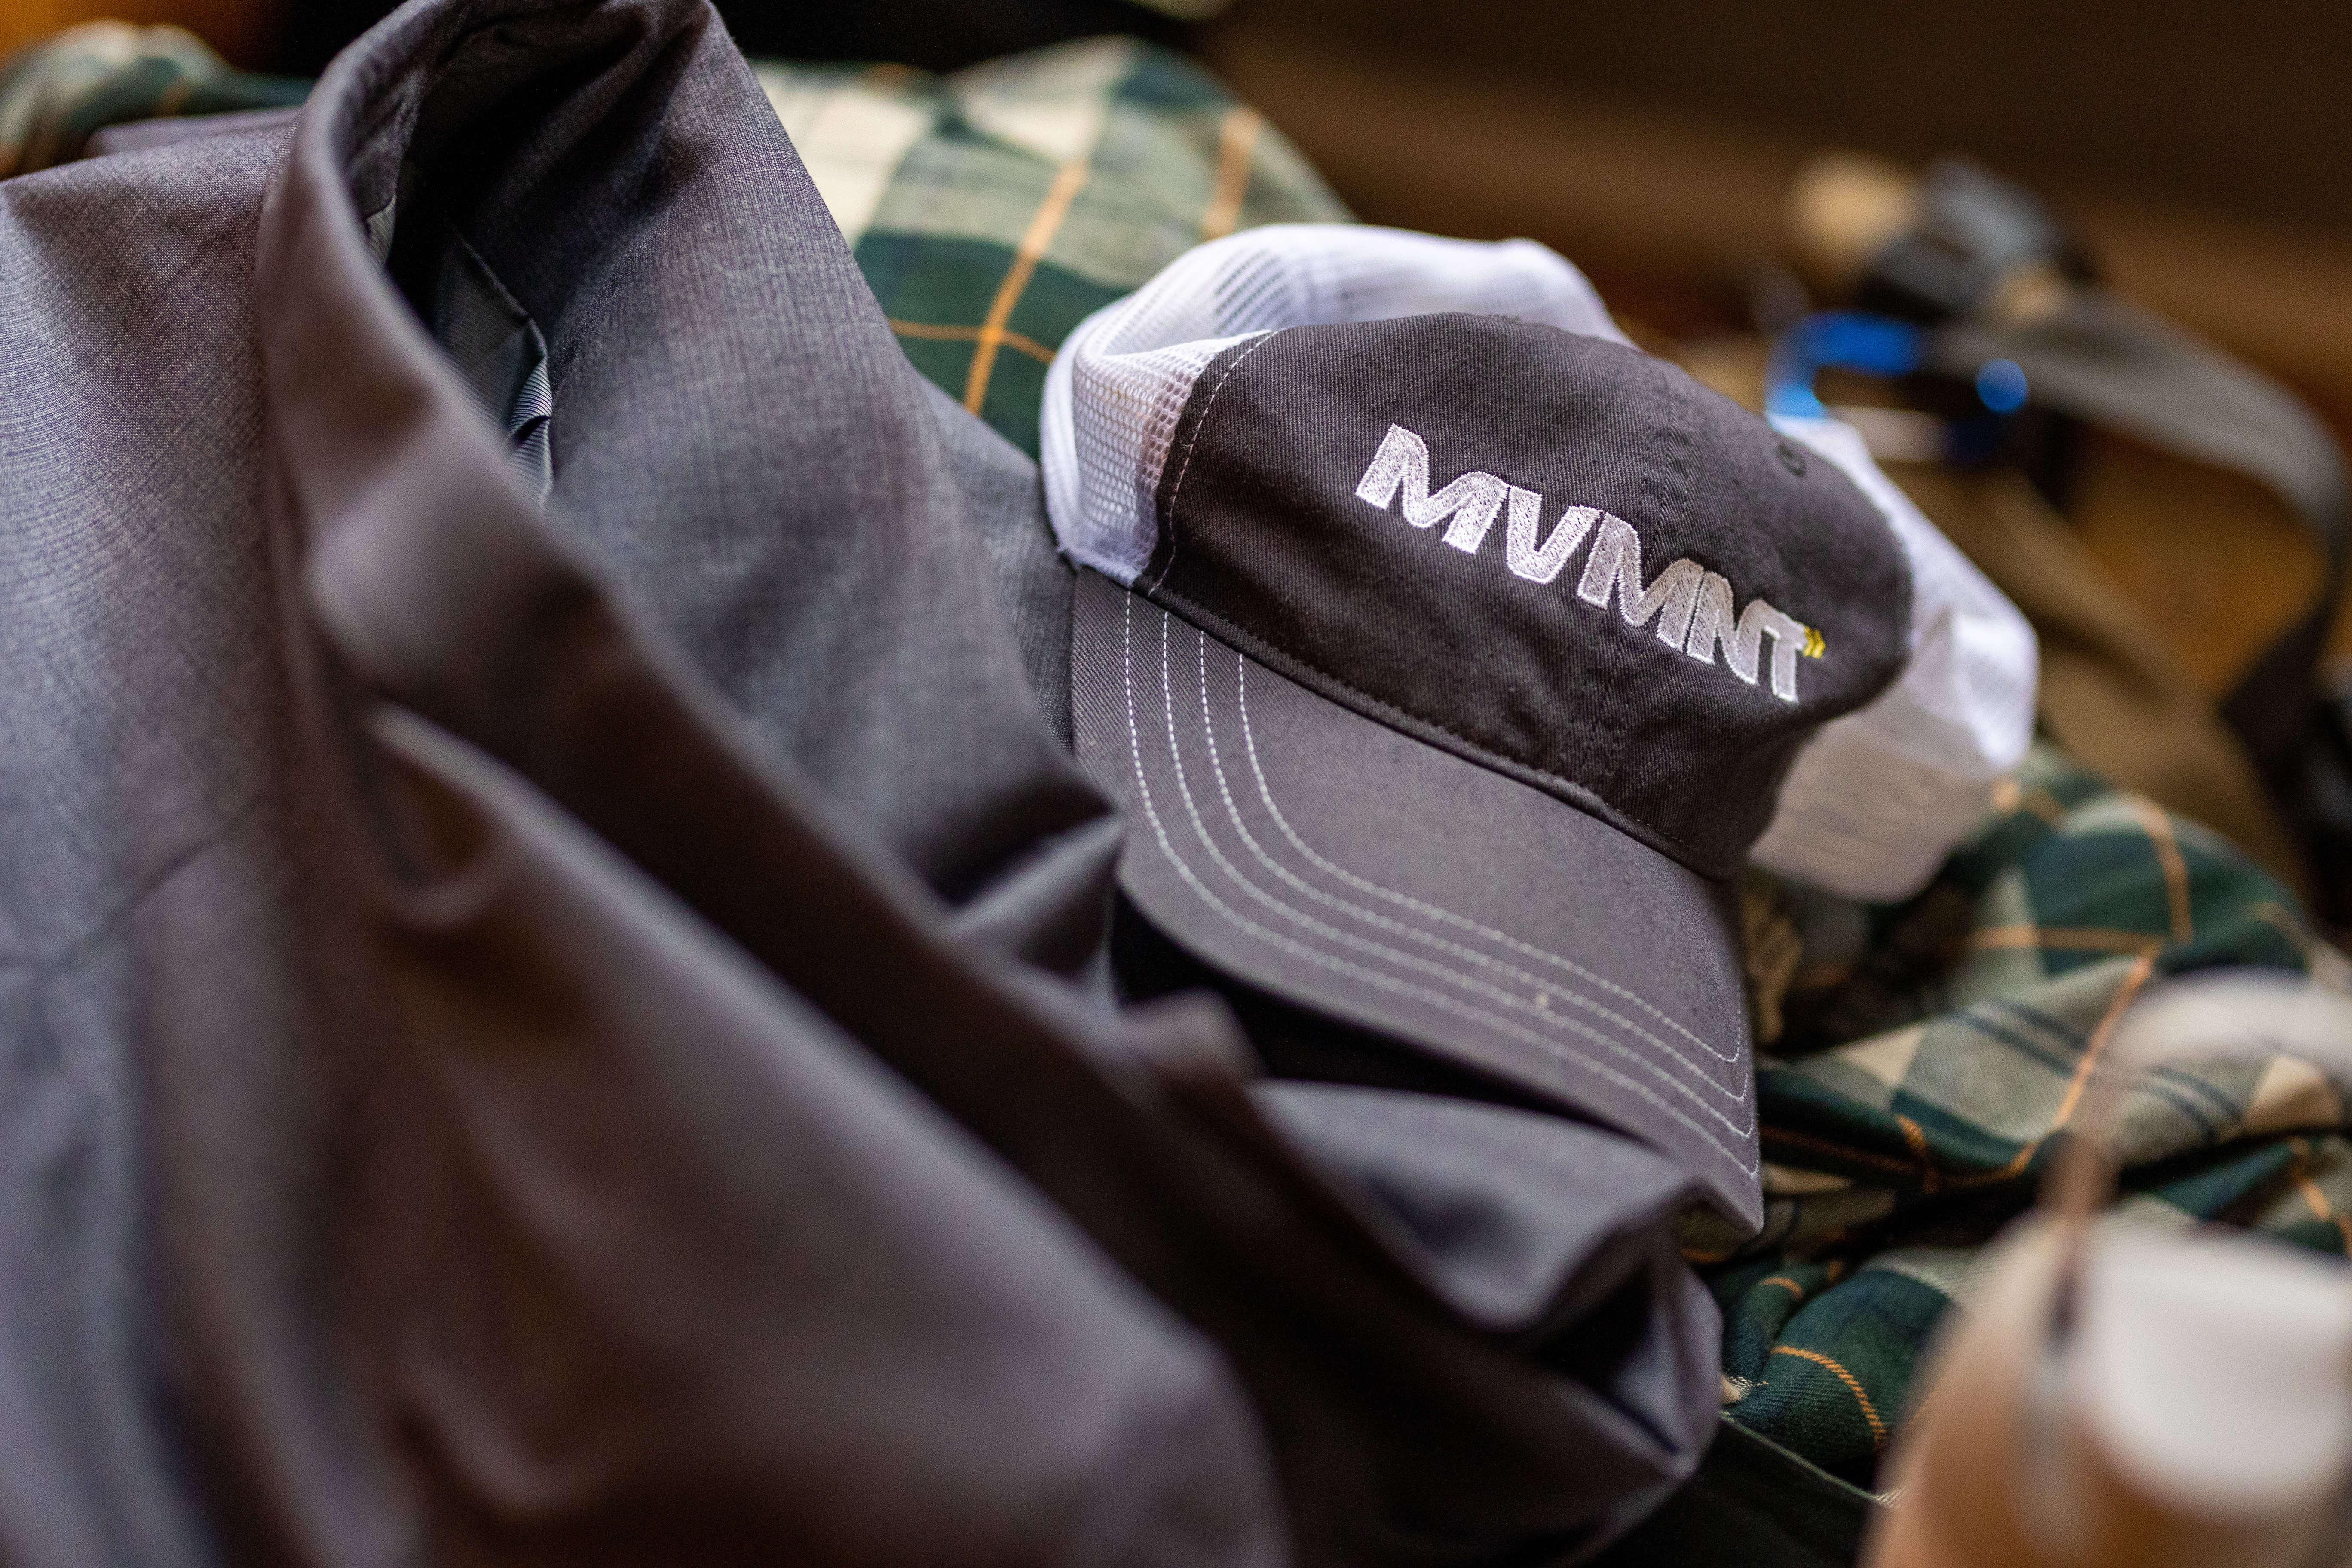 A MVMT branded trucker hat sits on a pile of clothes